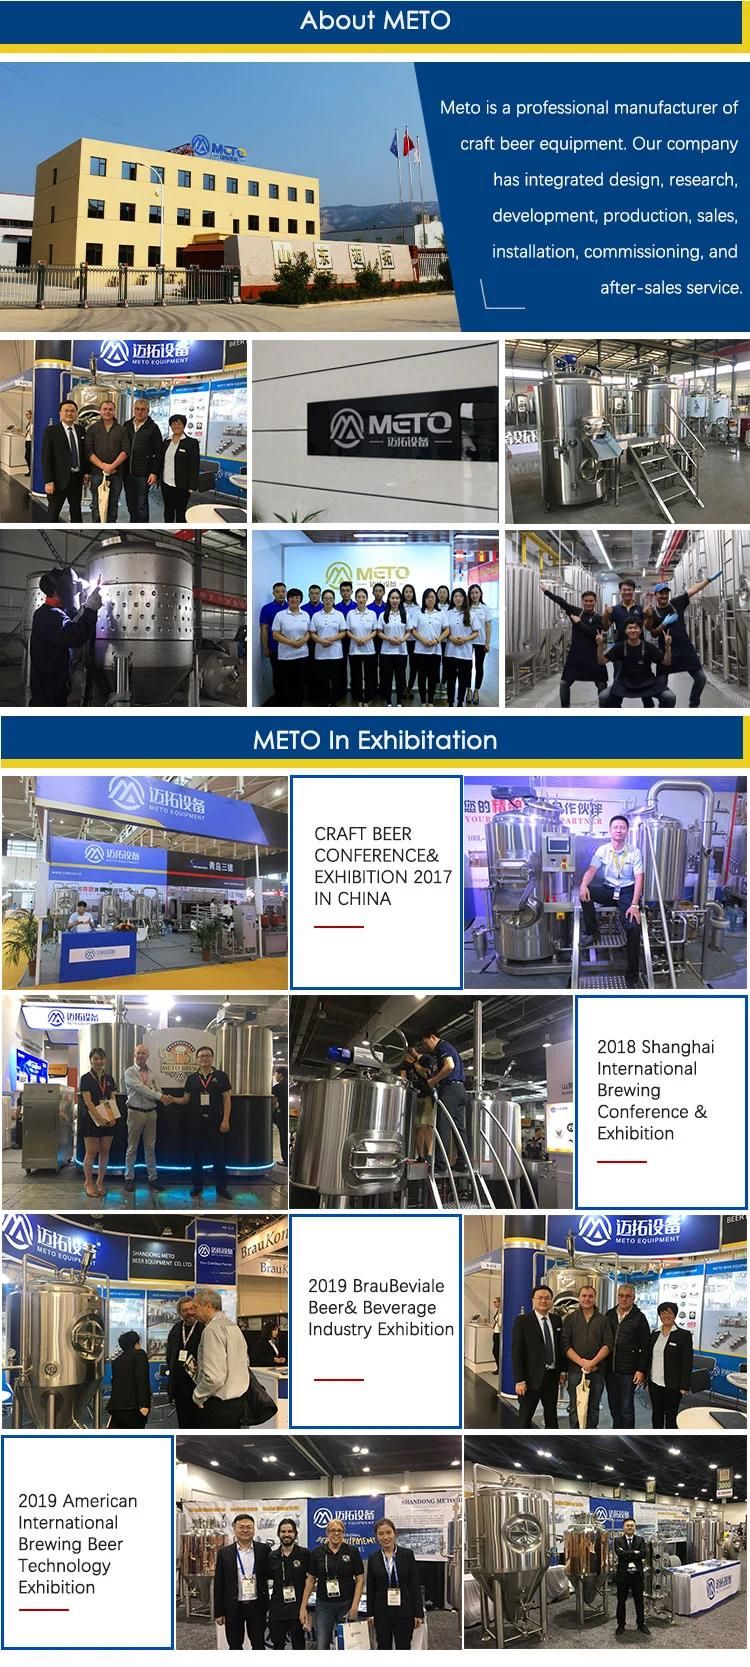 1000L Beer Brewing Equipment for Micro Beer Brewery